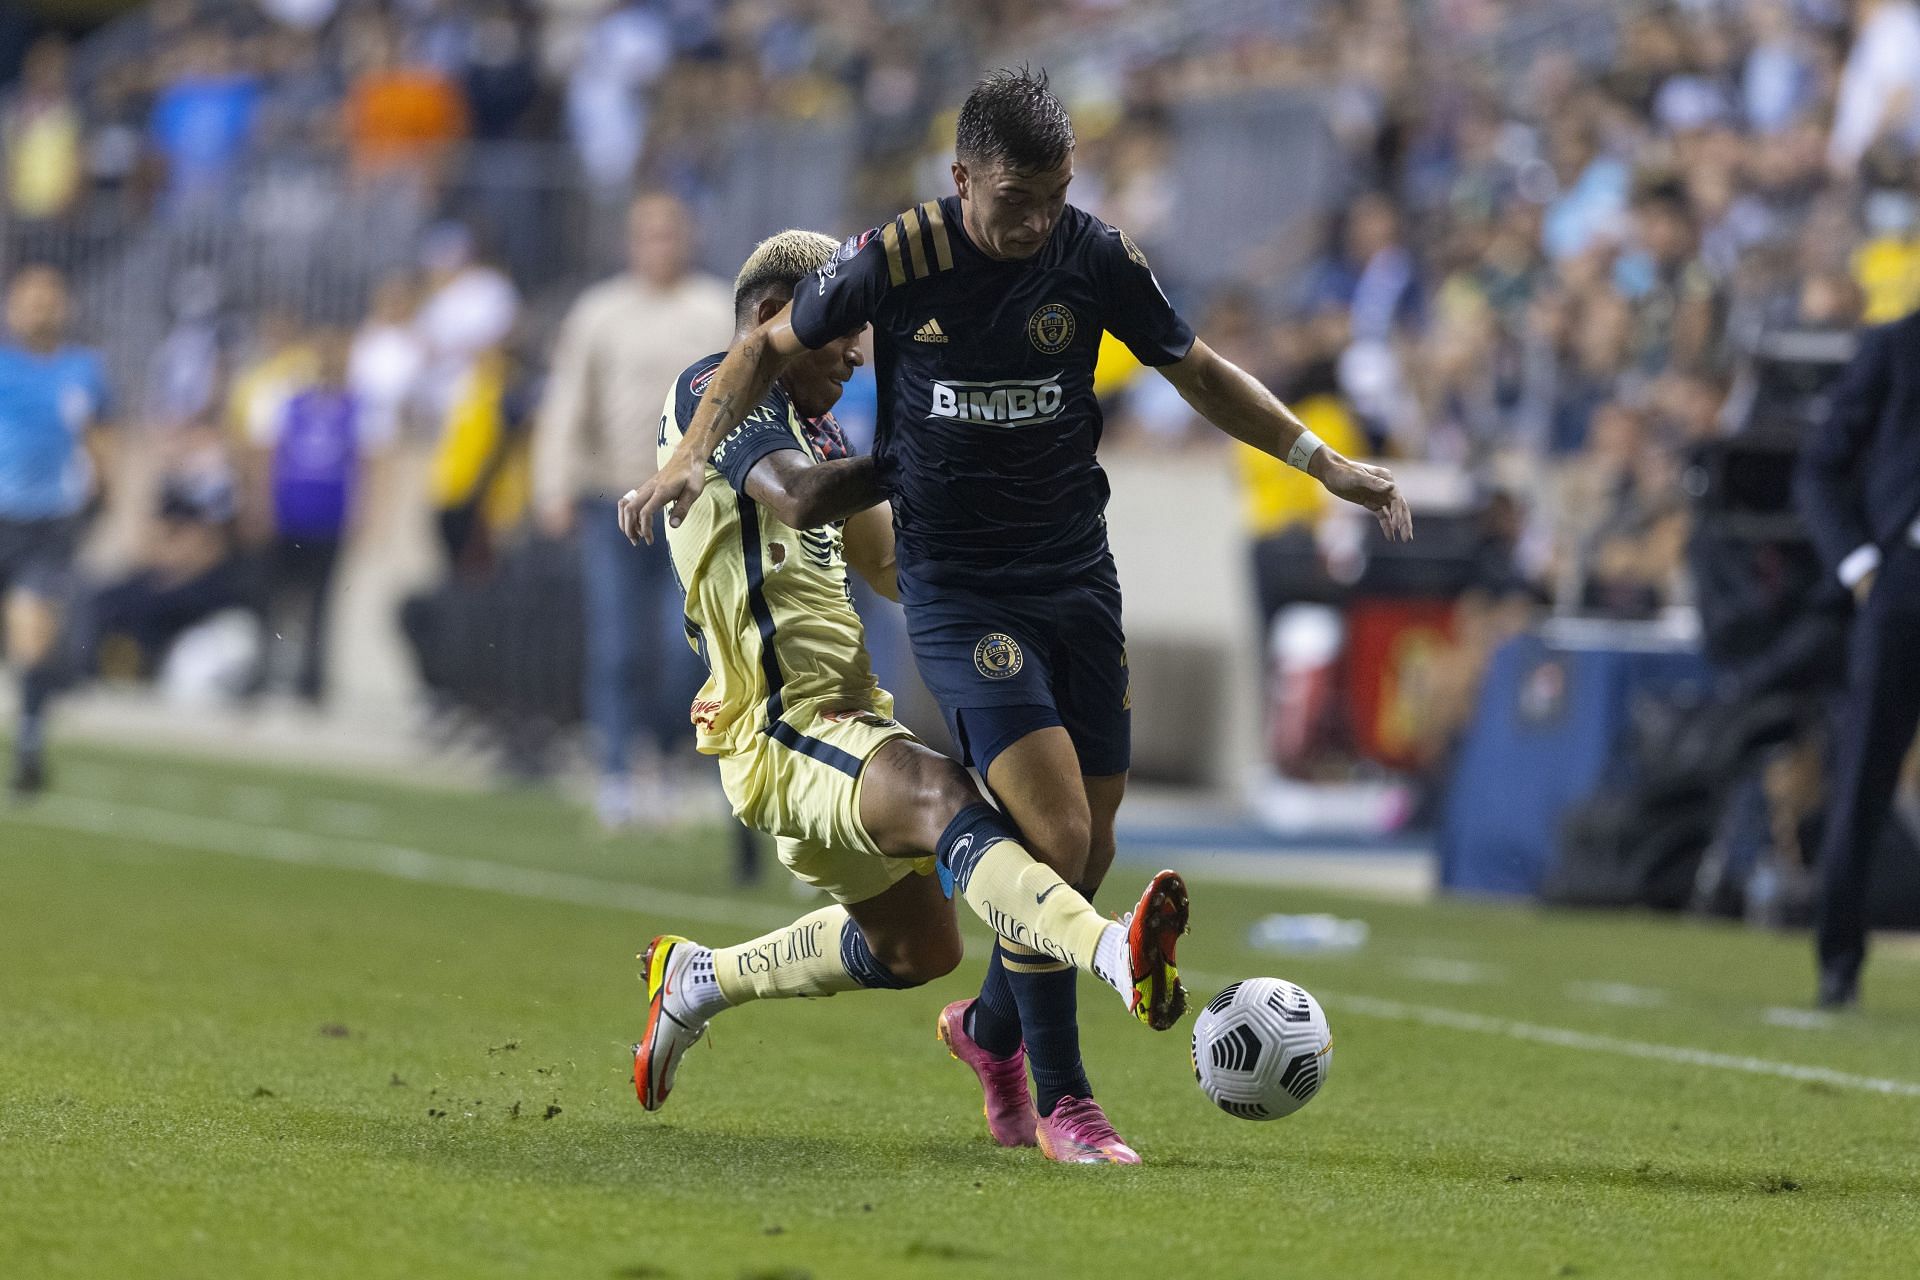 Philadelphia Union and Montreal will square off in the MLS on Saturday.